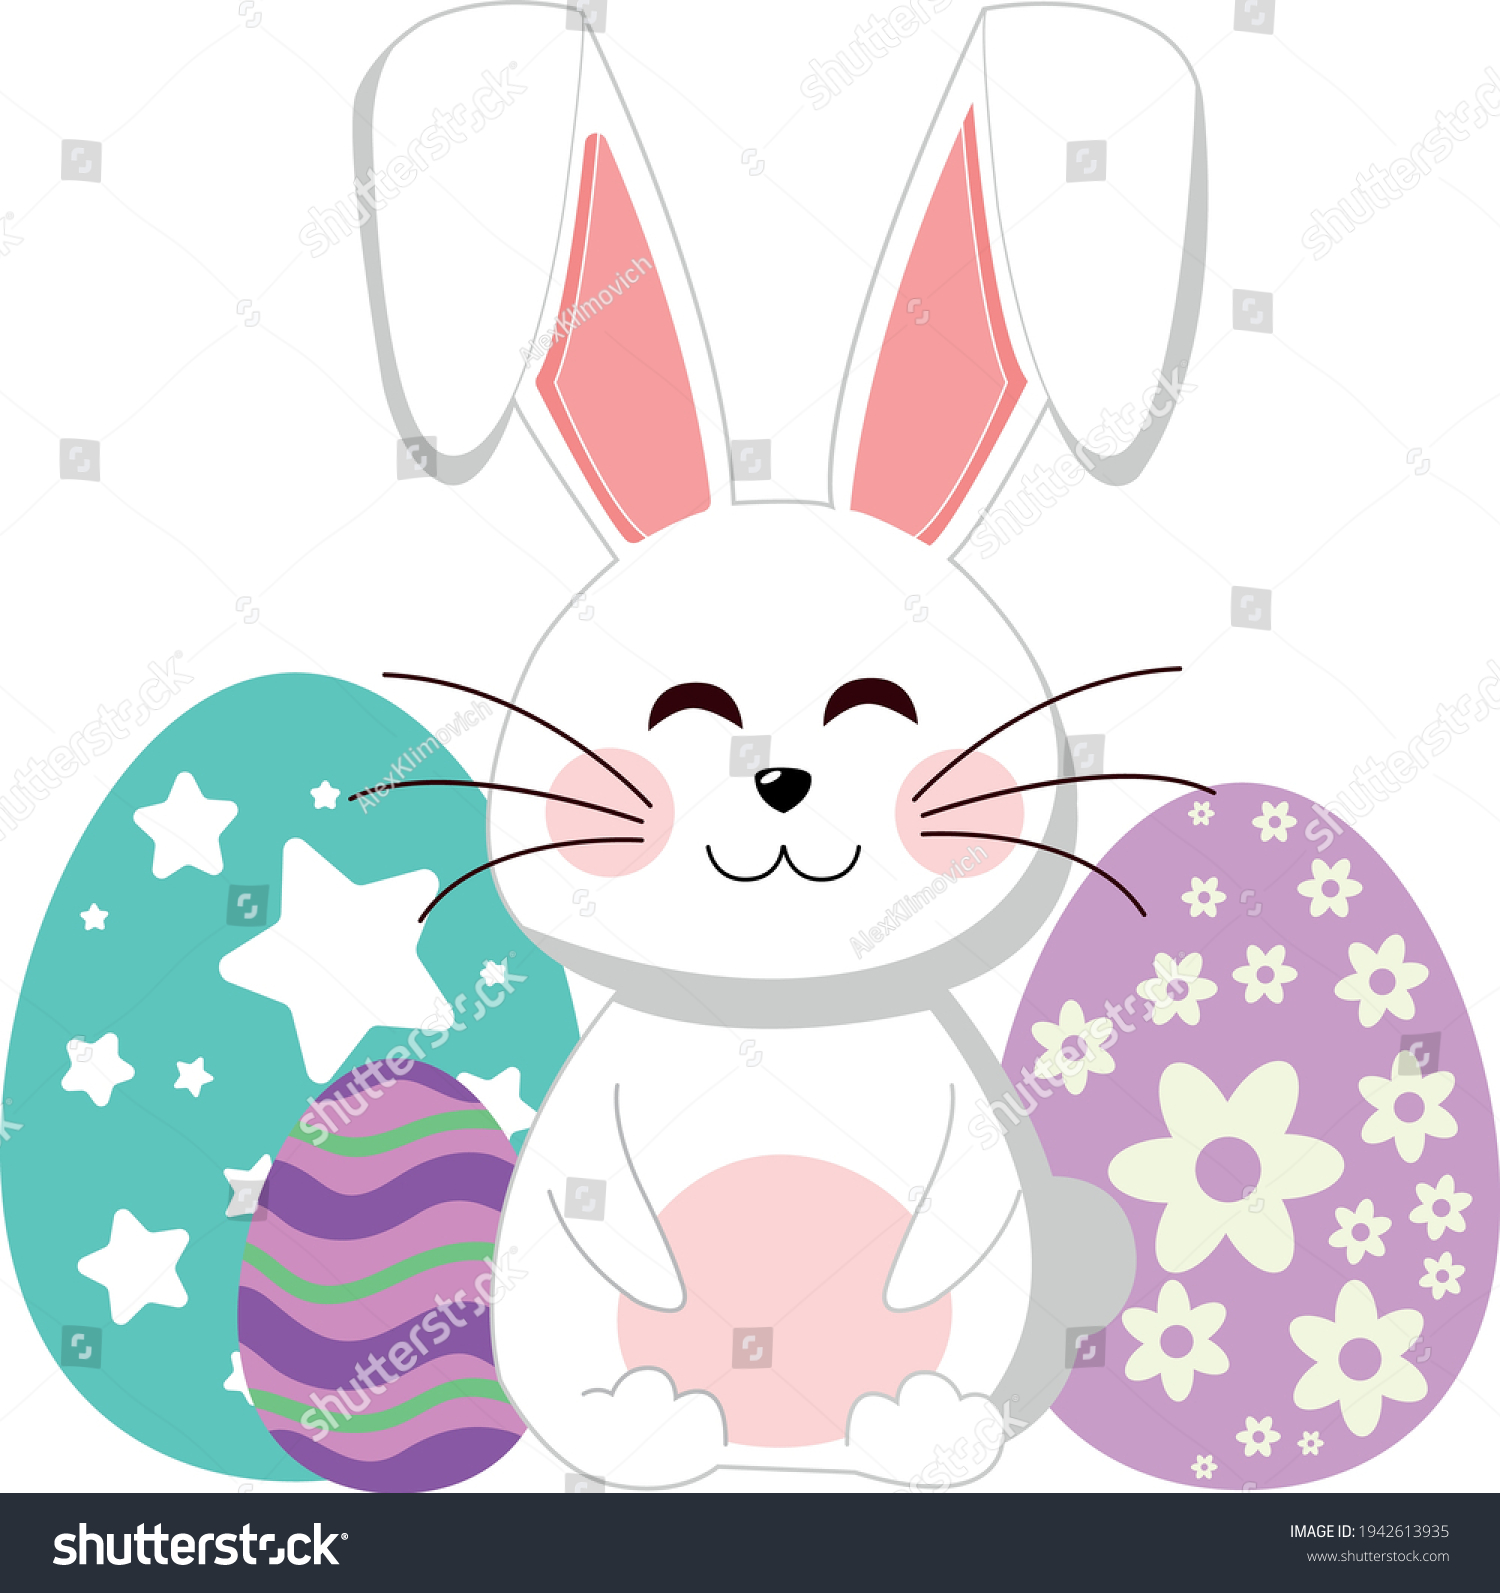 SVG of Easter Bunny Svg. Bunny With Glasses. Kid's Easter Design. Easter Svg.Vector illustration isolated on white background. Easter Bunny shirt design. Bunny cutting file for Silhouette and Cricut. svg